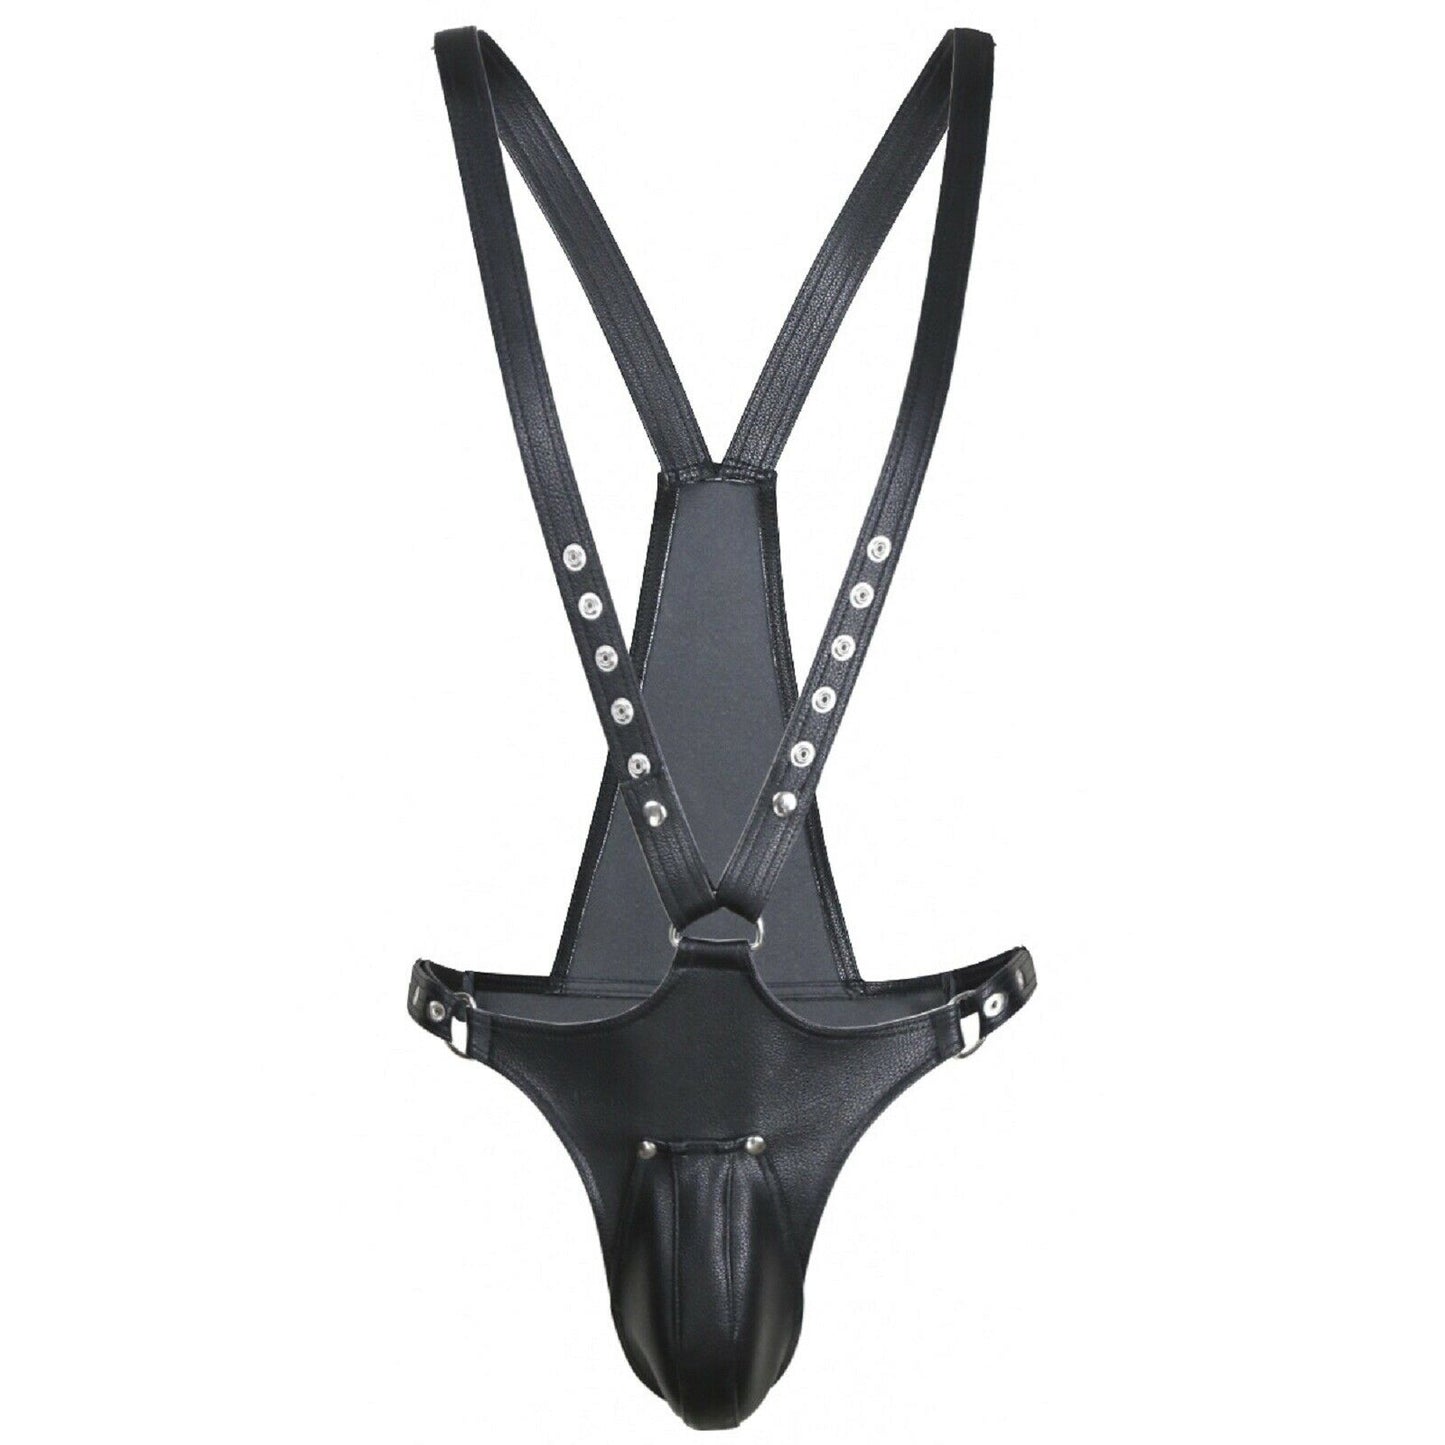 Male Chastity Belt Mankini Cock Cage Bondage BDSM PU Leather Harness Gay Sex Toy